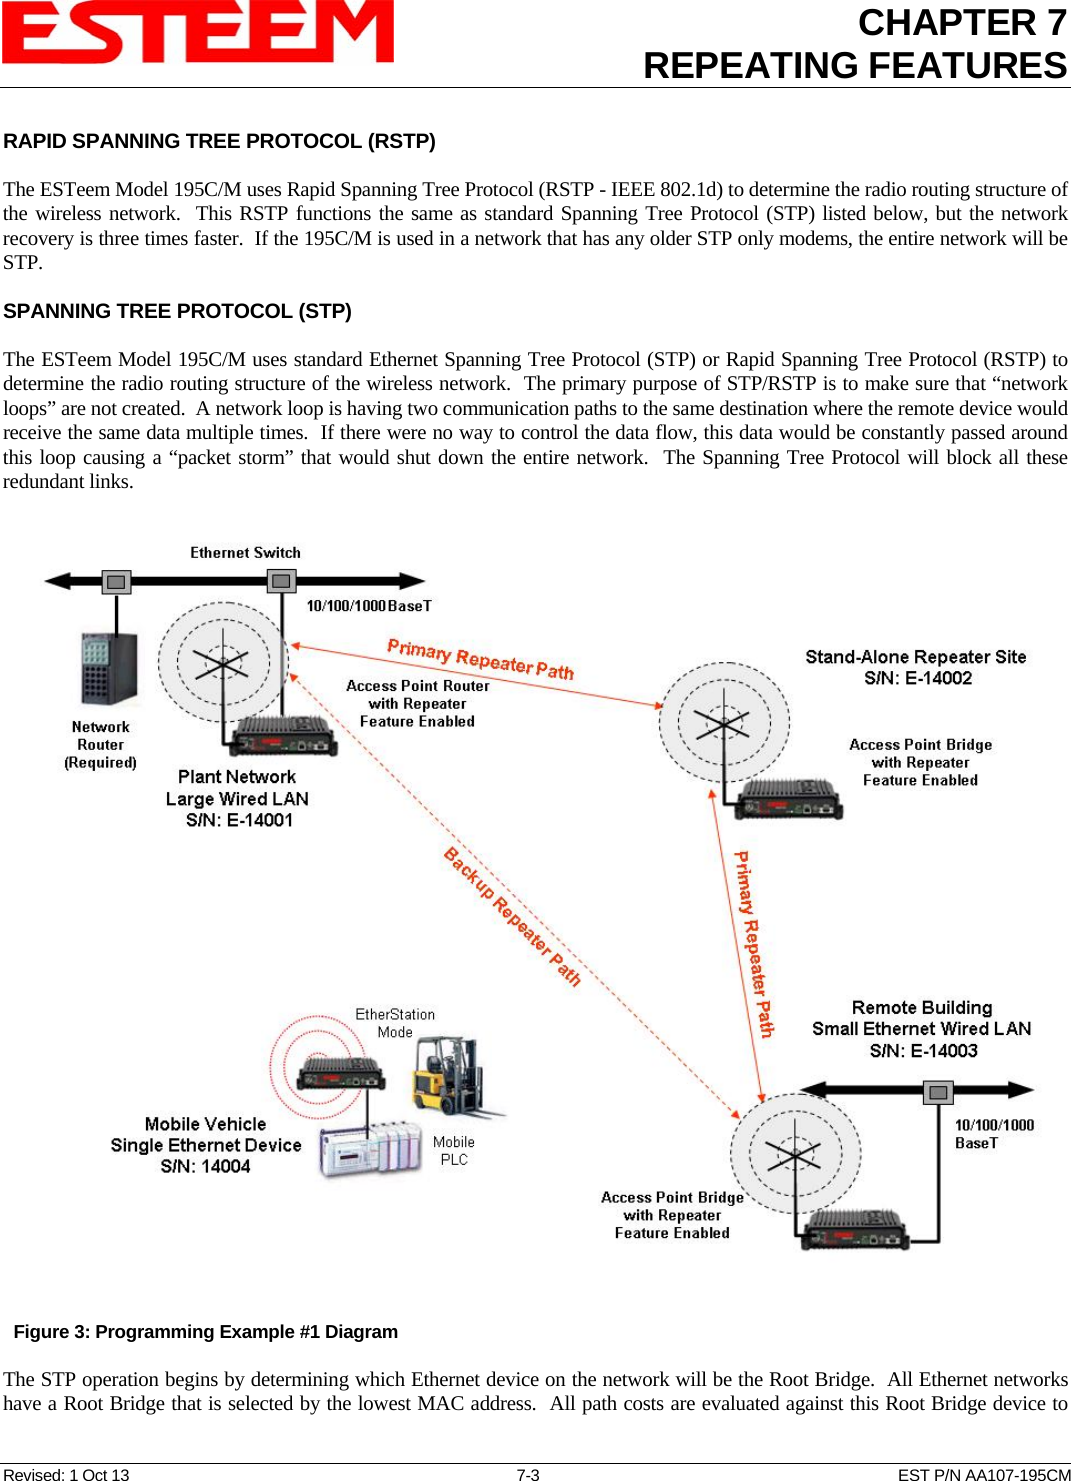 CHAPTER 7REPEATING FEATURES   Revised: 1 Oct 13  7-3  EST P/N AA107-195CM RAPID SPANNING TREE PROTOCOL (RSTP)  The ESTeem Model 195C/M uses Rapid Spanning Tree Protocol (RSTP - IEEE 802.1d) to determine the radio routing structure of the wireless network.  This RSTP functions the same as standard Spanning Tree Protocol (STP) listed below, but the network recovery is three times faster.  If the 195C/M is used in a network that has any older STP only modems, the entire network will be STP.  SPANNING TREE PROTOCOL (STP)  The ESTeem Model 195C/M uses standard Ethernet Spanning Tree Protocol (STP) or Rapid Spanning Tree Protocol (RSTP) to determine the radio routing structure of the wireless network.  The primary purpose of STP/RSTP is to make sure that “network loops” are not created.  A network loop is having two communication paths to the same destination where the remote device would receive the same data multiple times.  If there were no way to control the data flow, this data would be constantly passed around this loop causing a “packet storm” that would shut down the entire network.  The Spanning Tree Protocol will block all these redundant links.     Figure 3: Programming Example #1 Diagram  The STP operation begins by determining which Ethernet device on the network will be the Root Bridge.  All Ethernet networks have a Root Bridge that is selected by the lowest MAC address.  All path costs are evaluated against this Root Bridge device to 